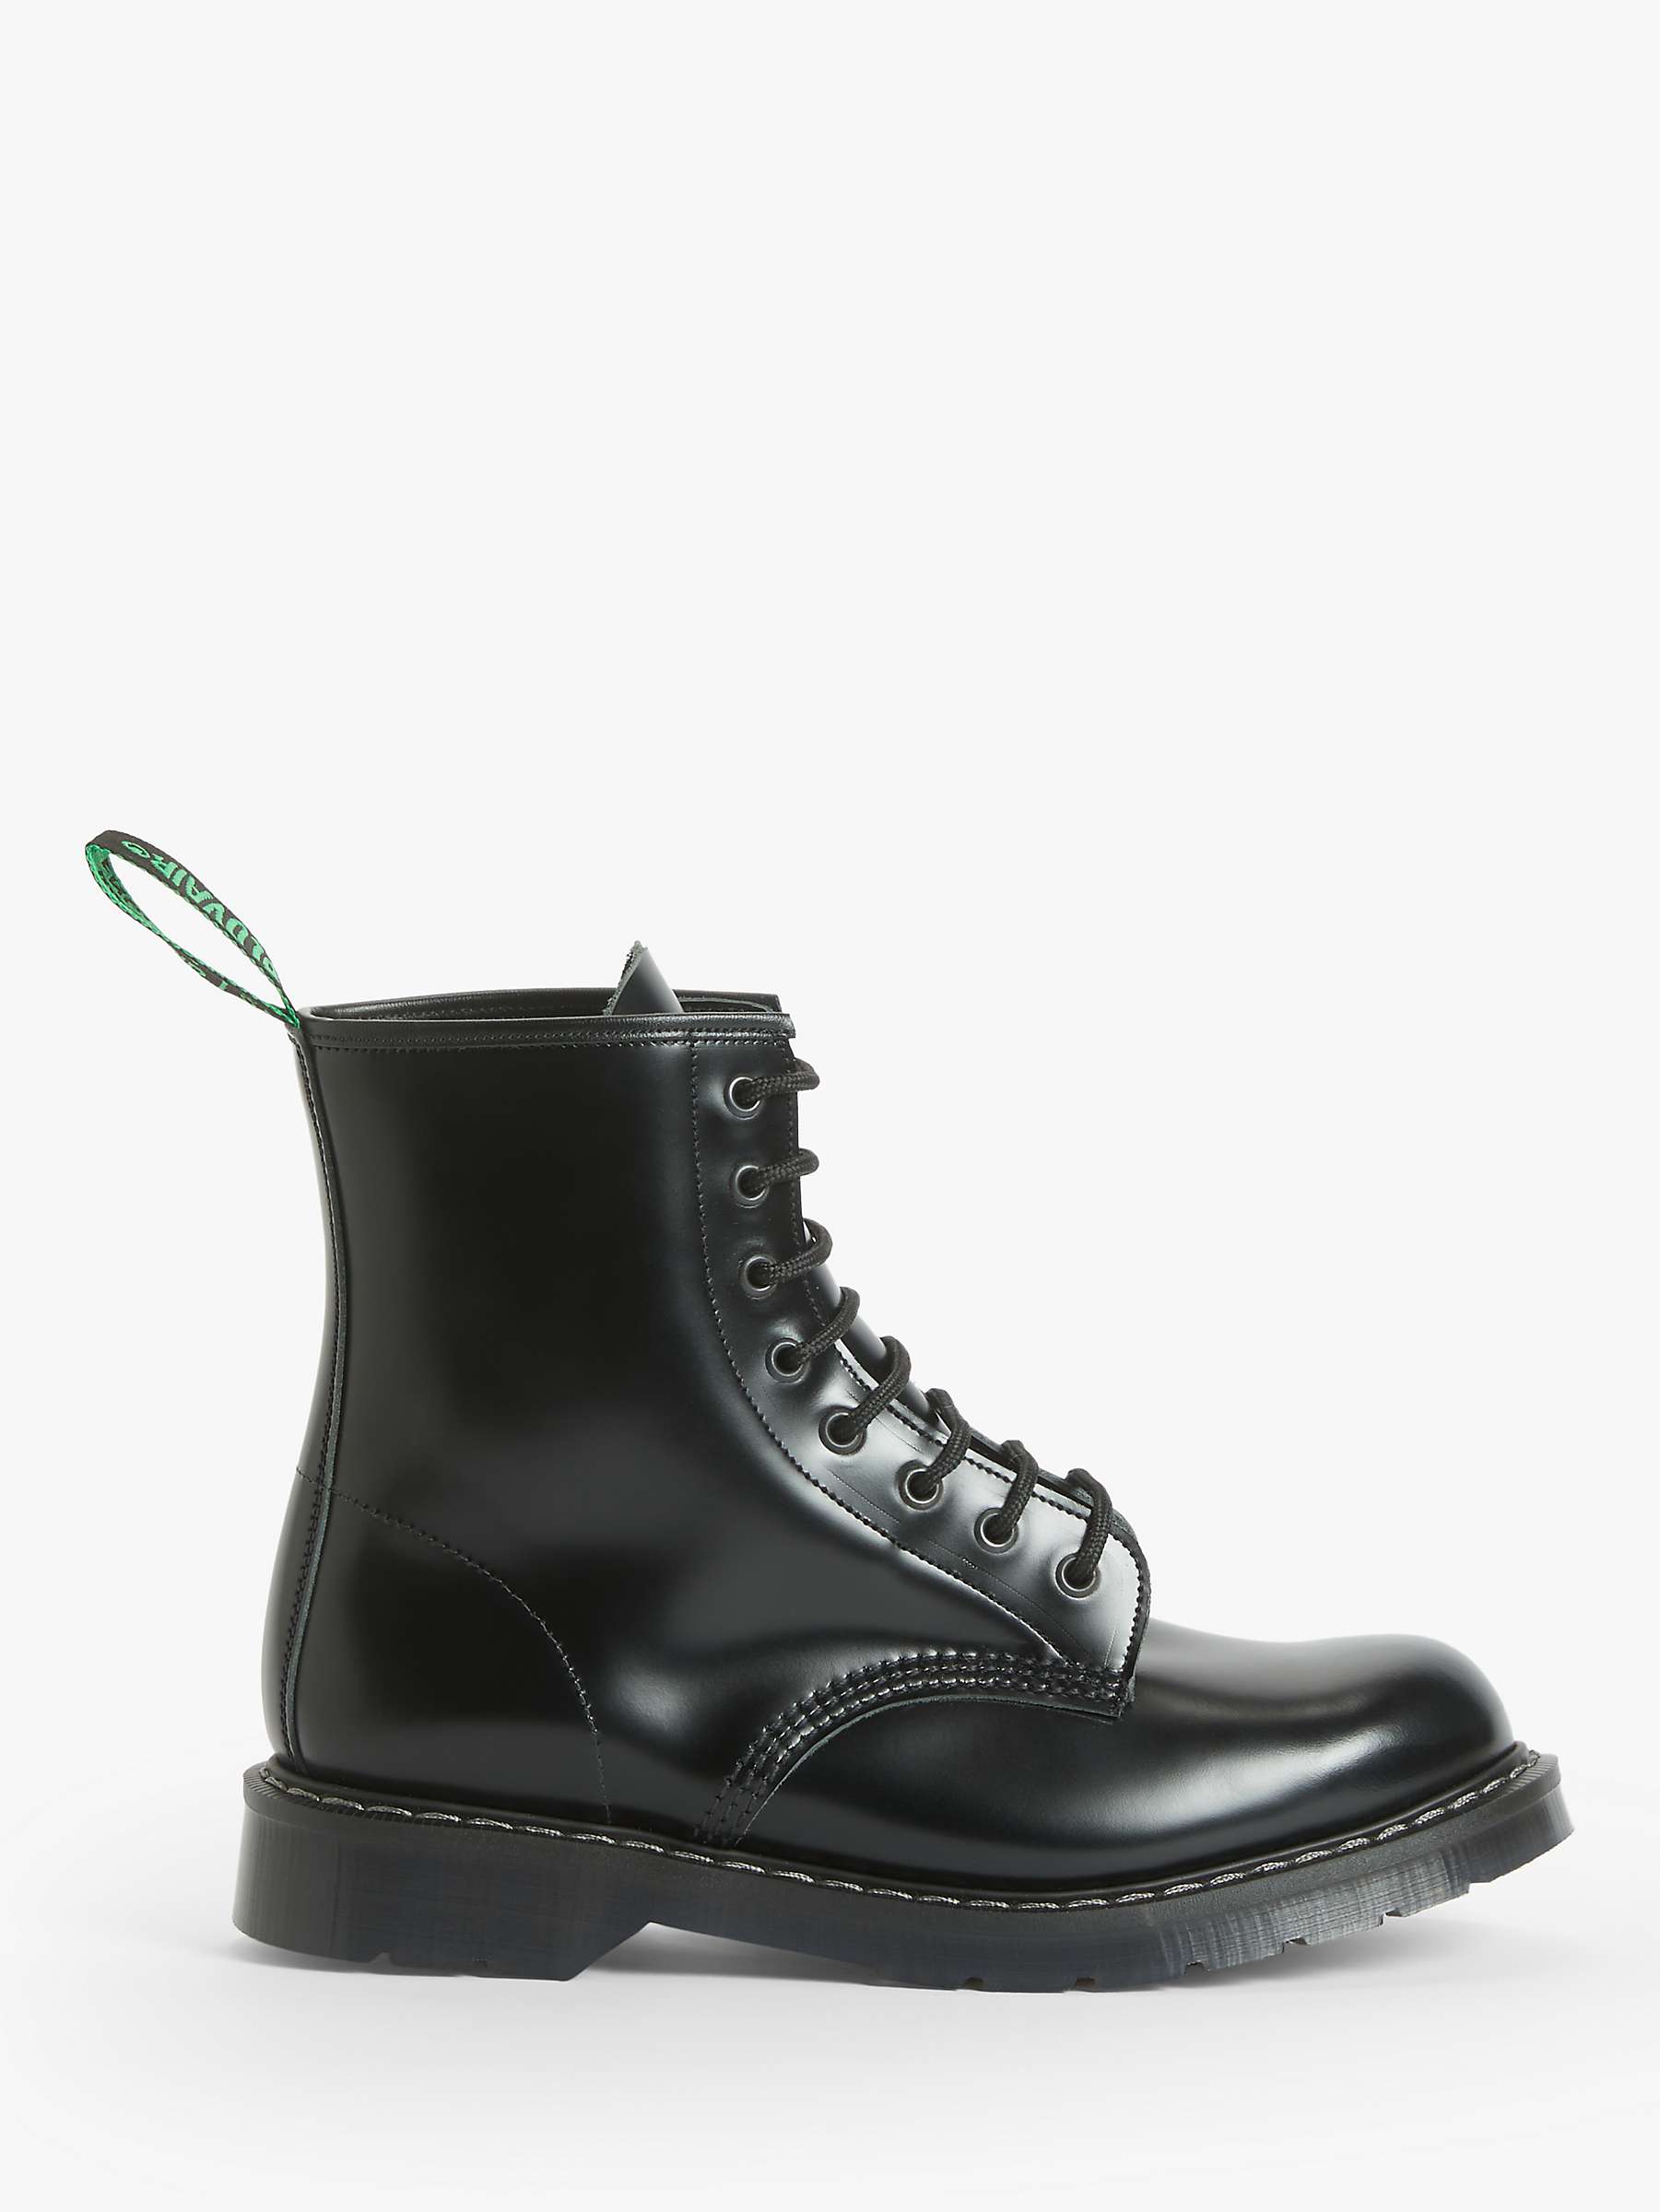 Buy Solovair Made in England 8 Eyelet Hi Shine Leather Derby Boots Online at johnlewis.com